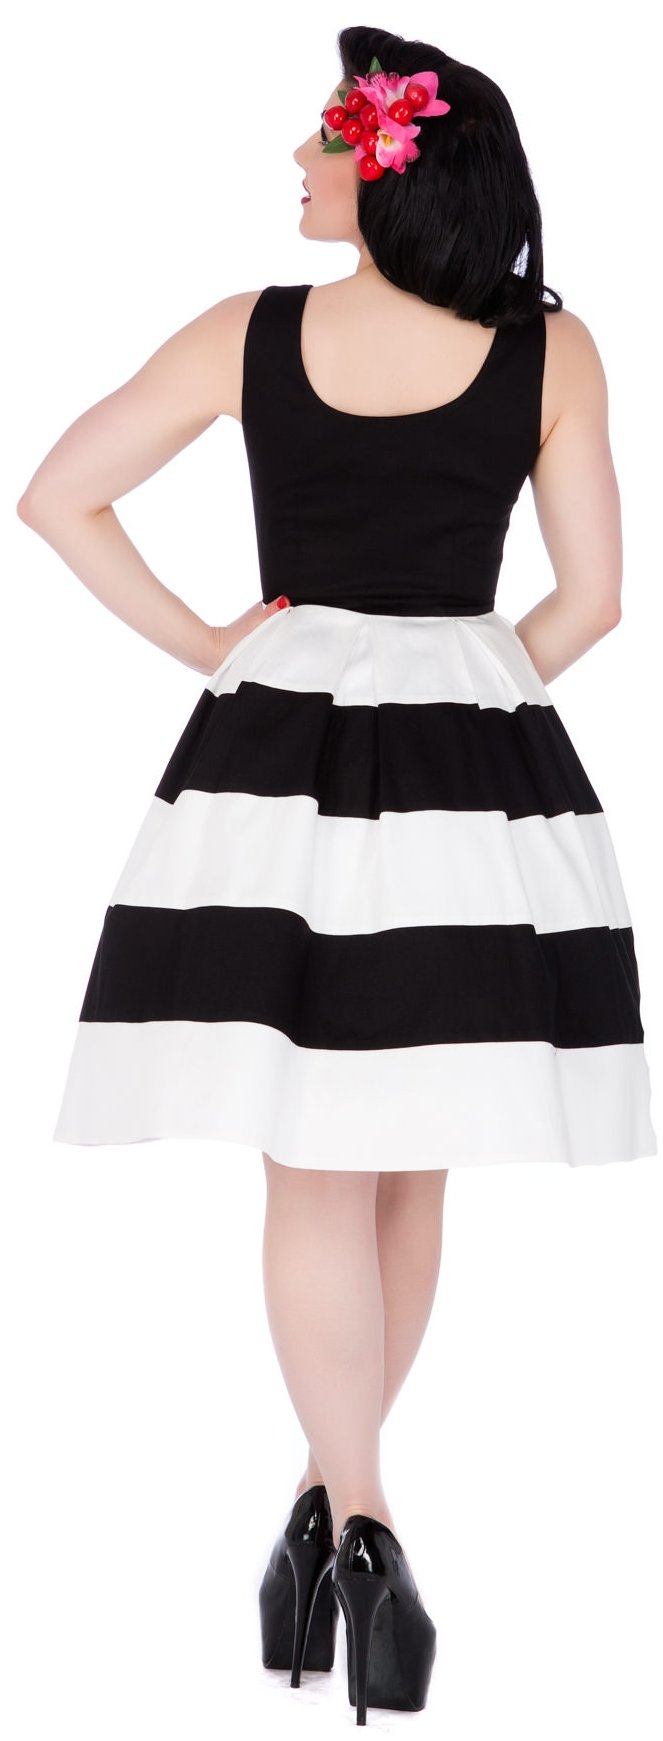 Model wearing our black and white striped Anna sleeveless dress, back view